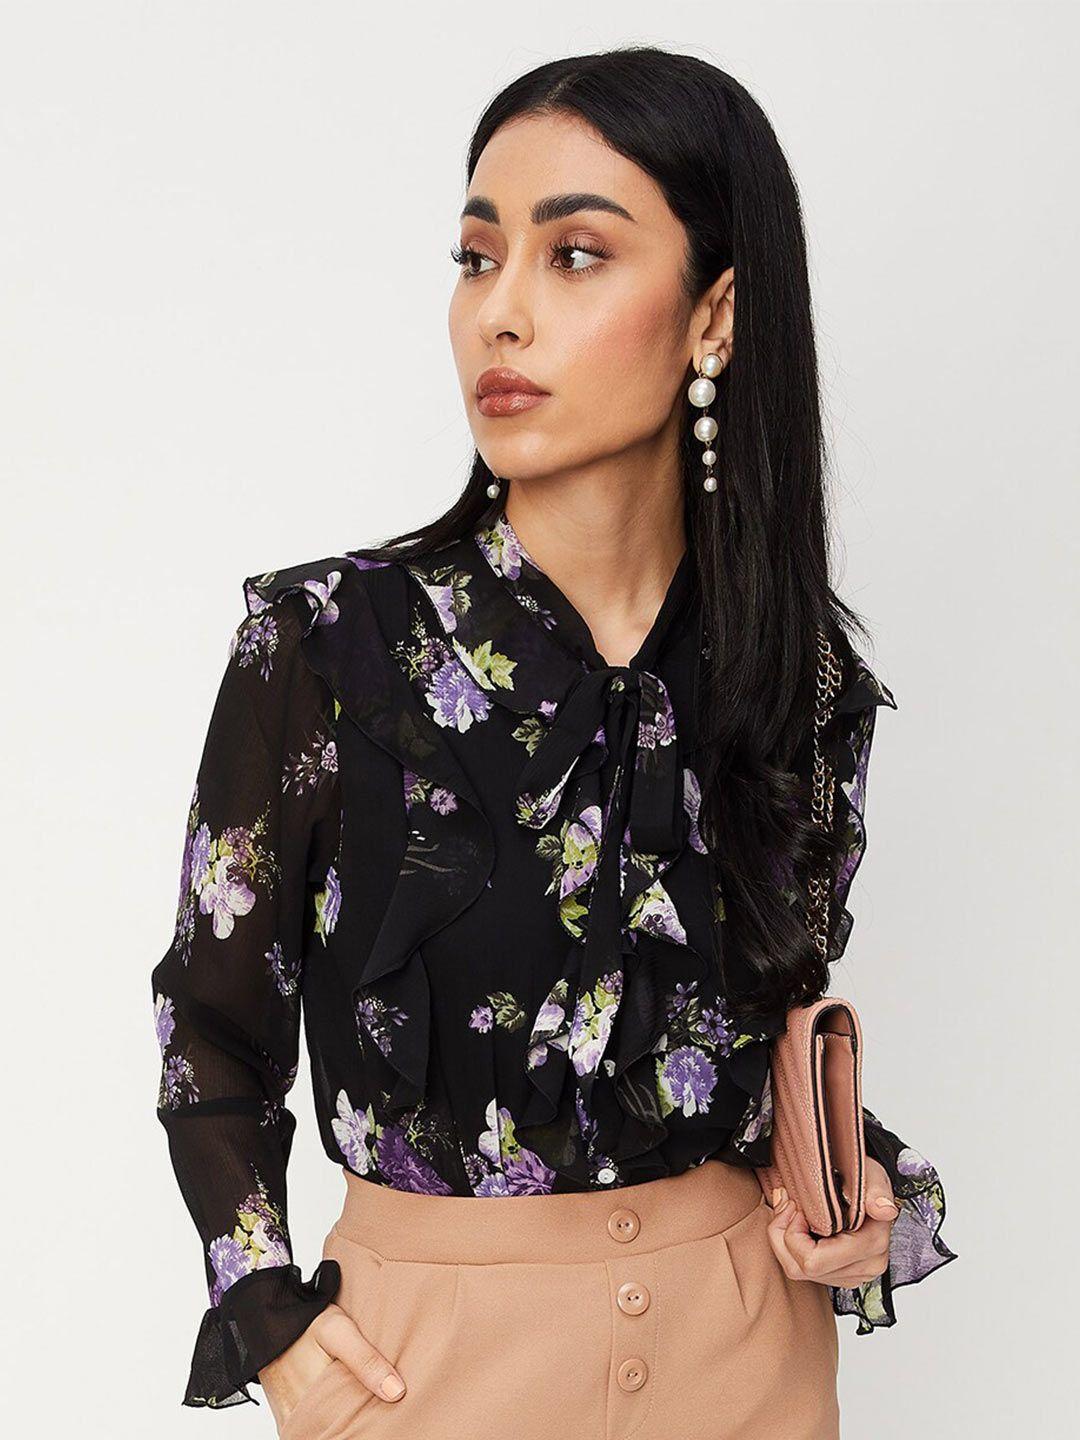 max floral printed tie-up neck bell sleeve shirt style top